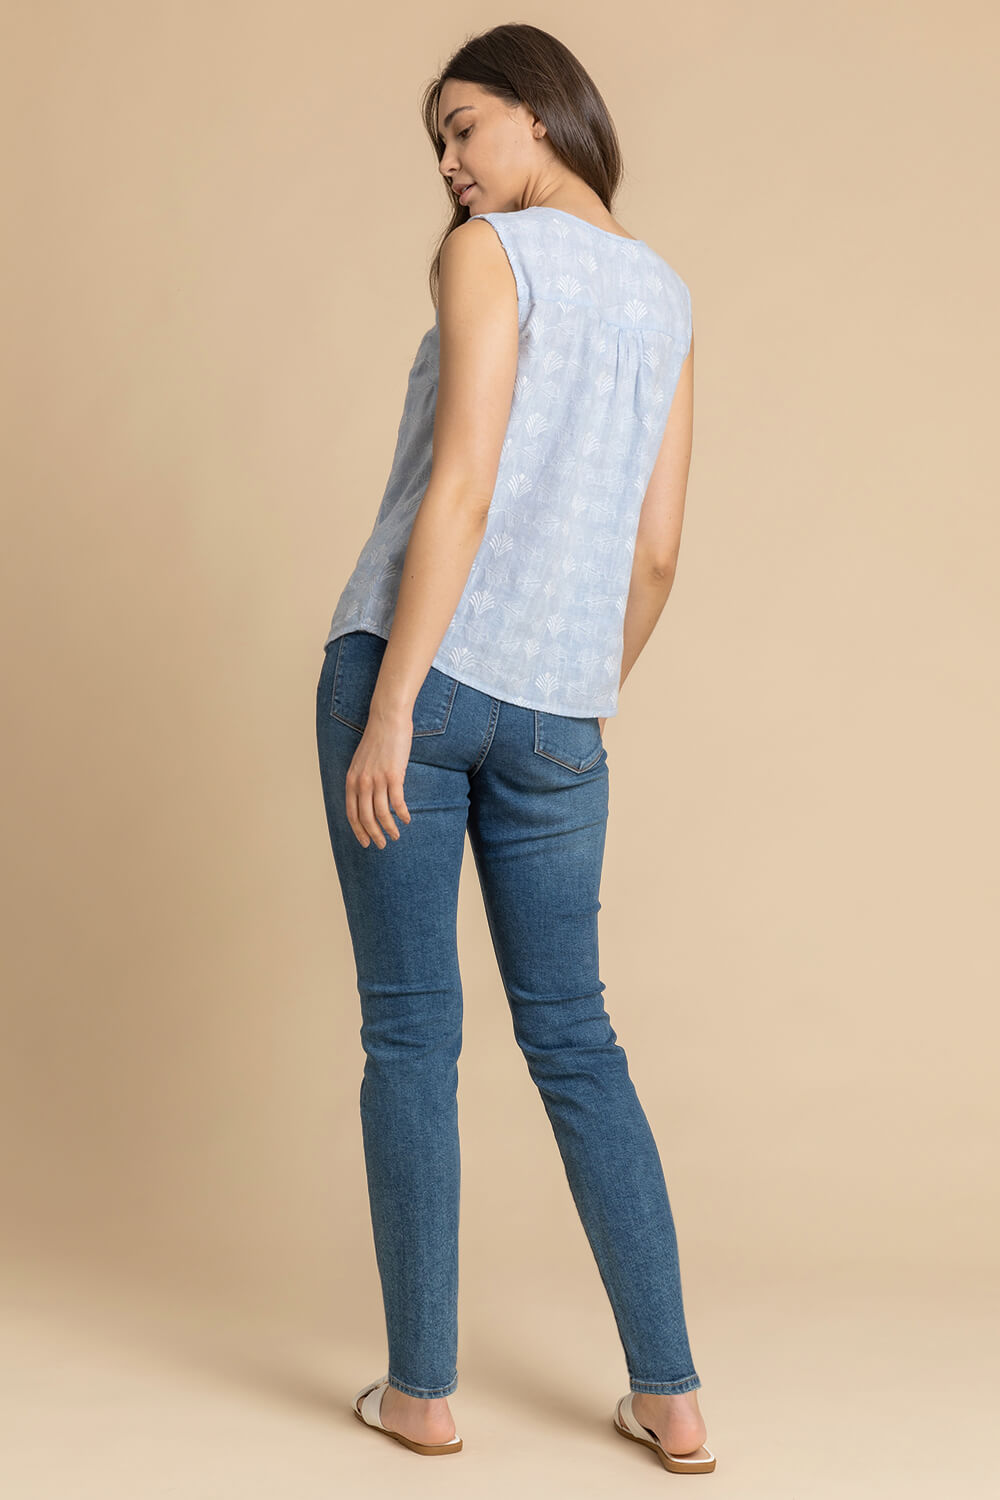 Light Blue  Sleeveless Embroidered Cotton Blouse, Image 3 of 4